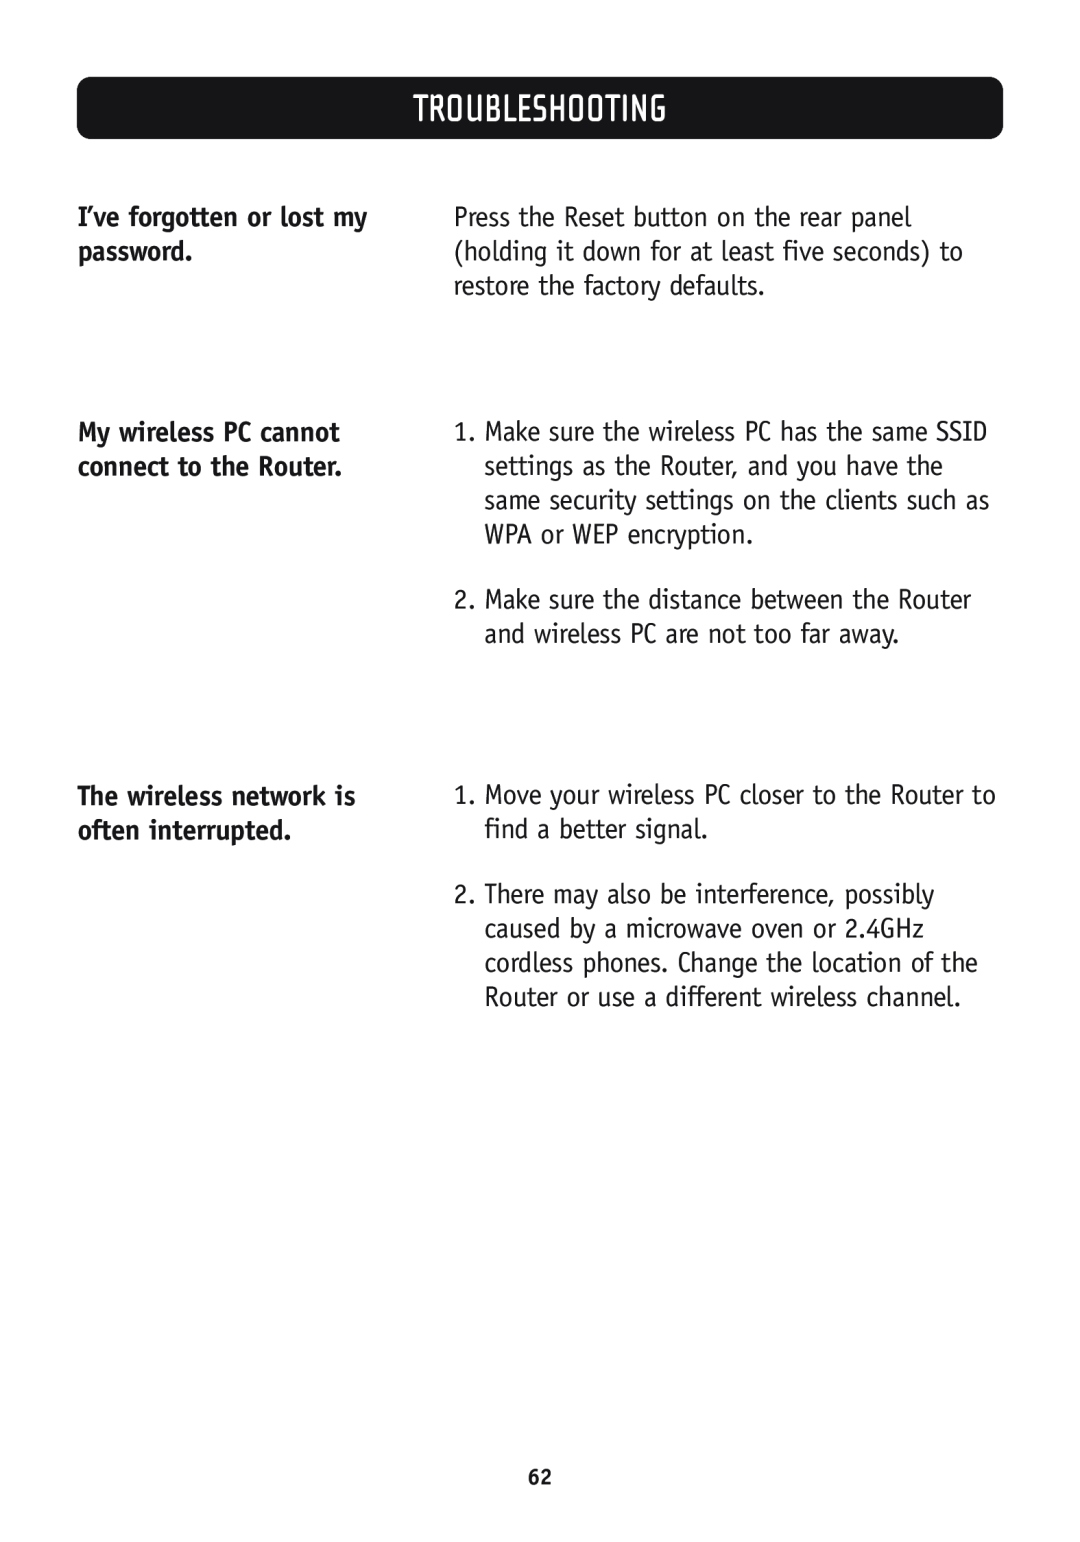 Belkin F5D7630-4A, F5D7630-4B user manual My wireless PC cannot, connect to the Router, Troubleshooting 